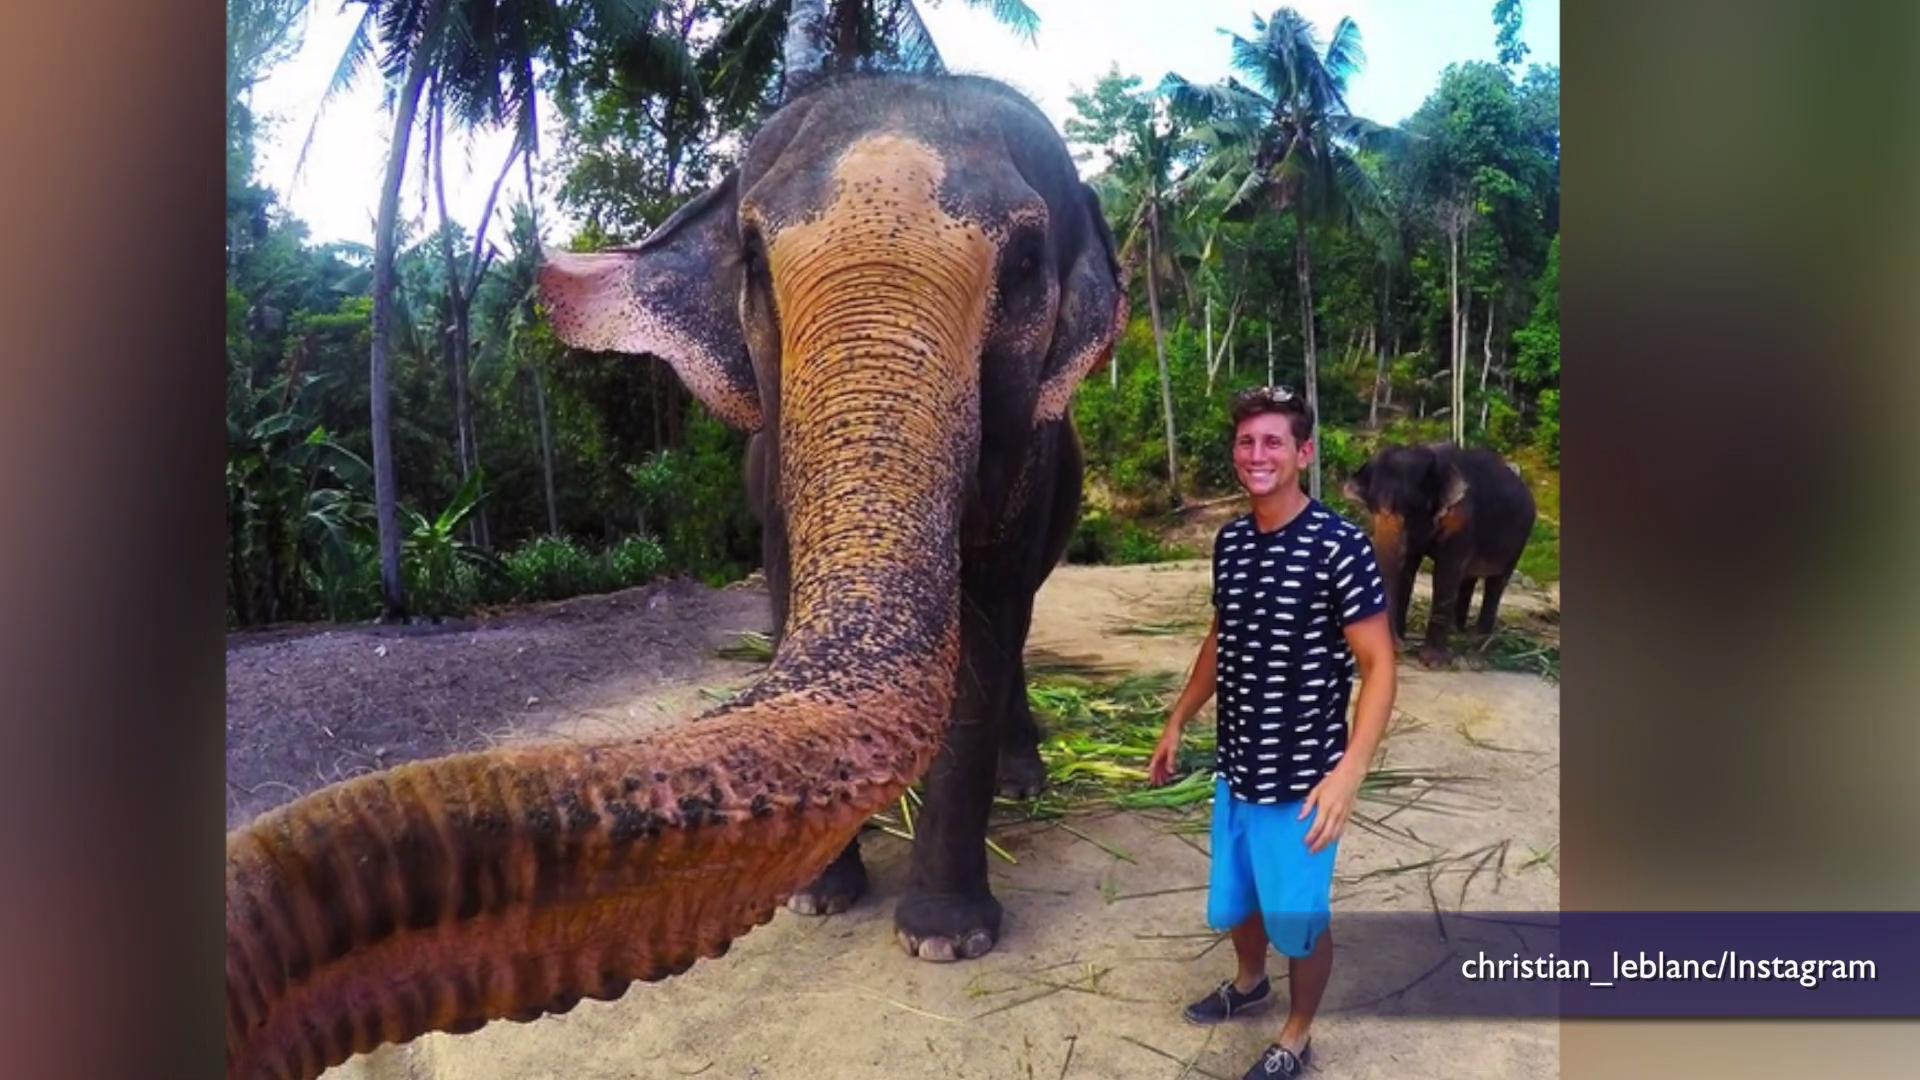 Elephant grabs tourist's GoPro and takes world's first 'elfie'